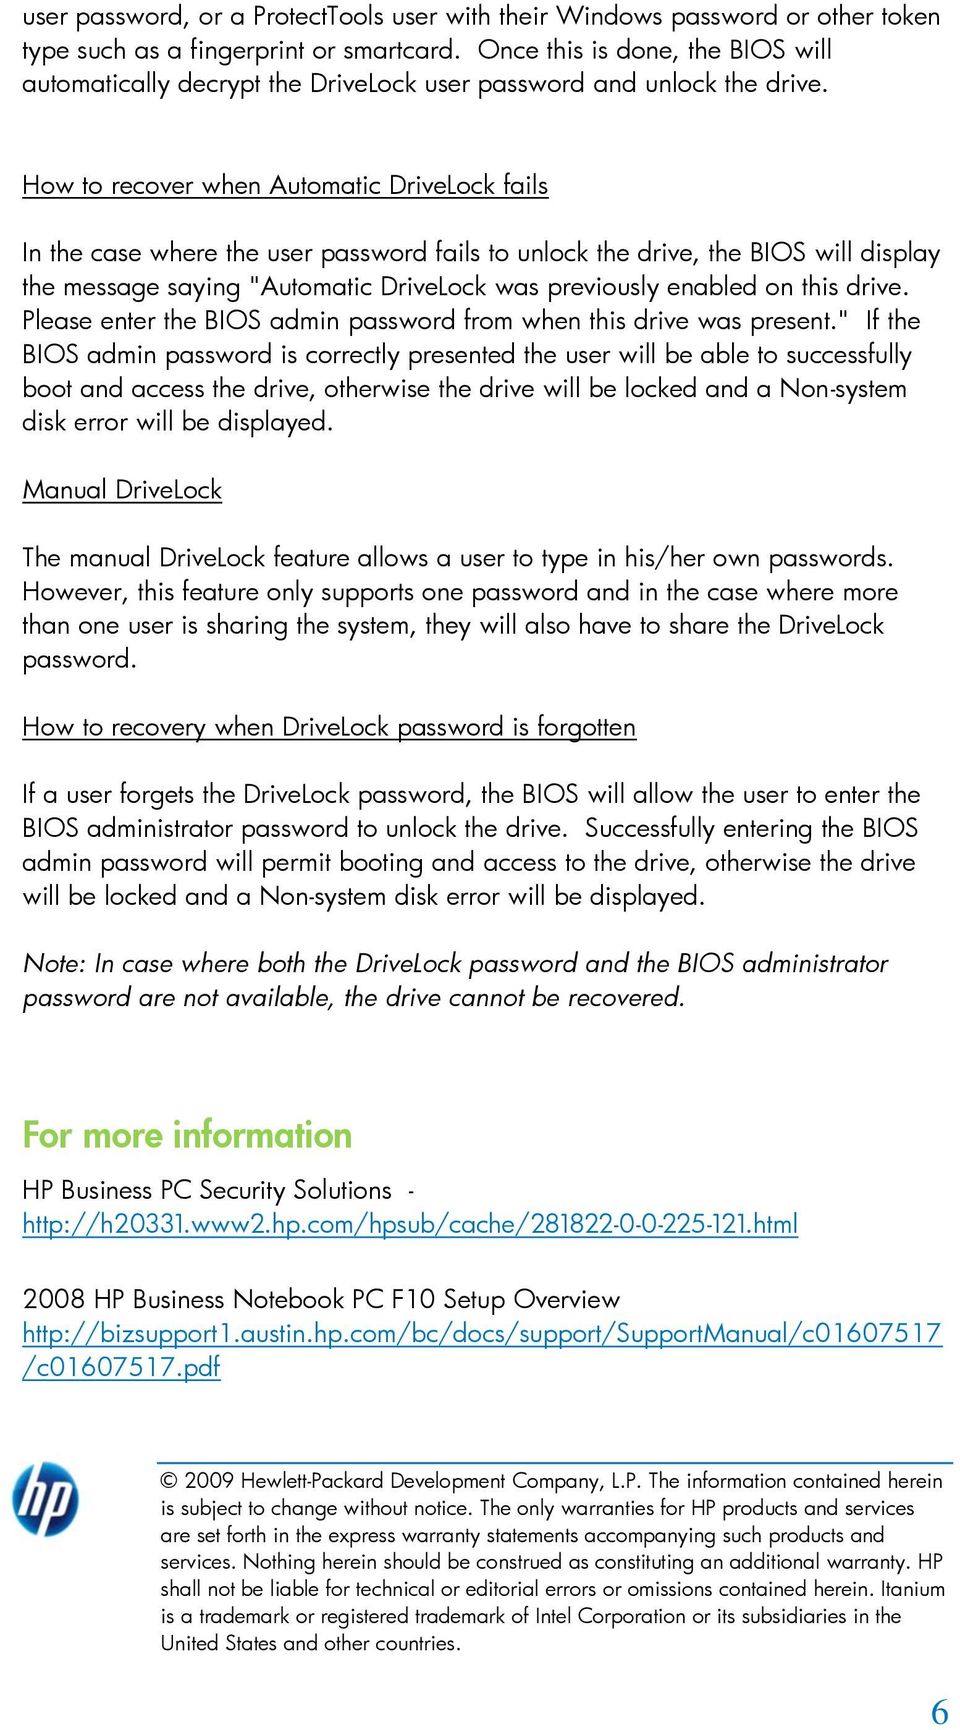 How to recover when Automatic DriveLock fails In the case where the user password fails to unlock the drive, the BIOS will display the message saying "Automatic DriveLock was previously enabled on